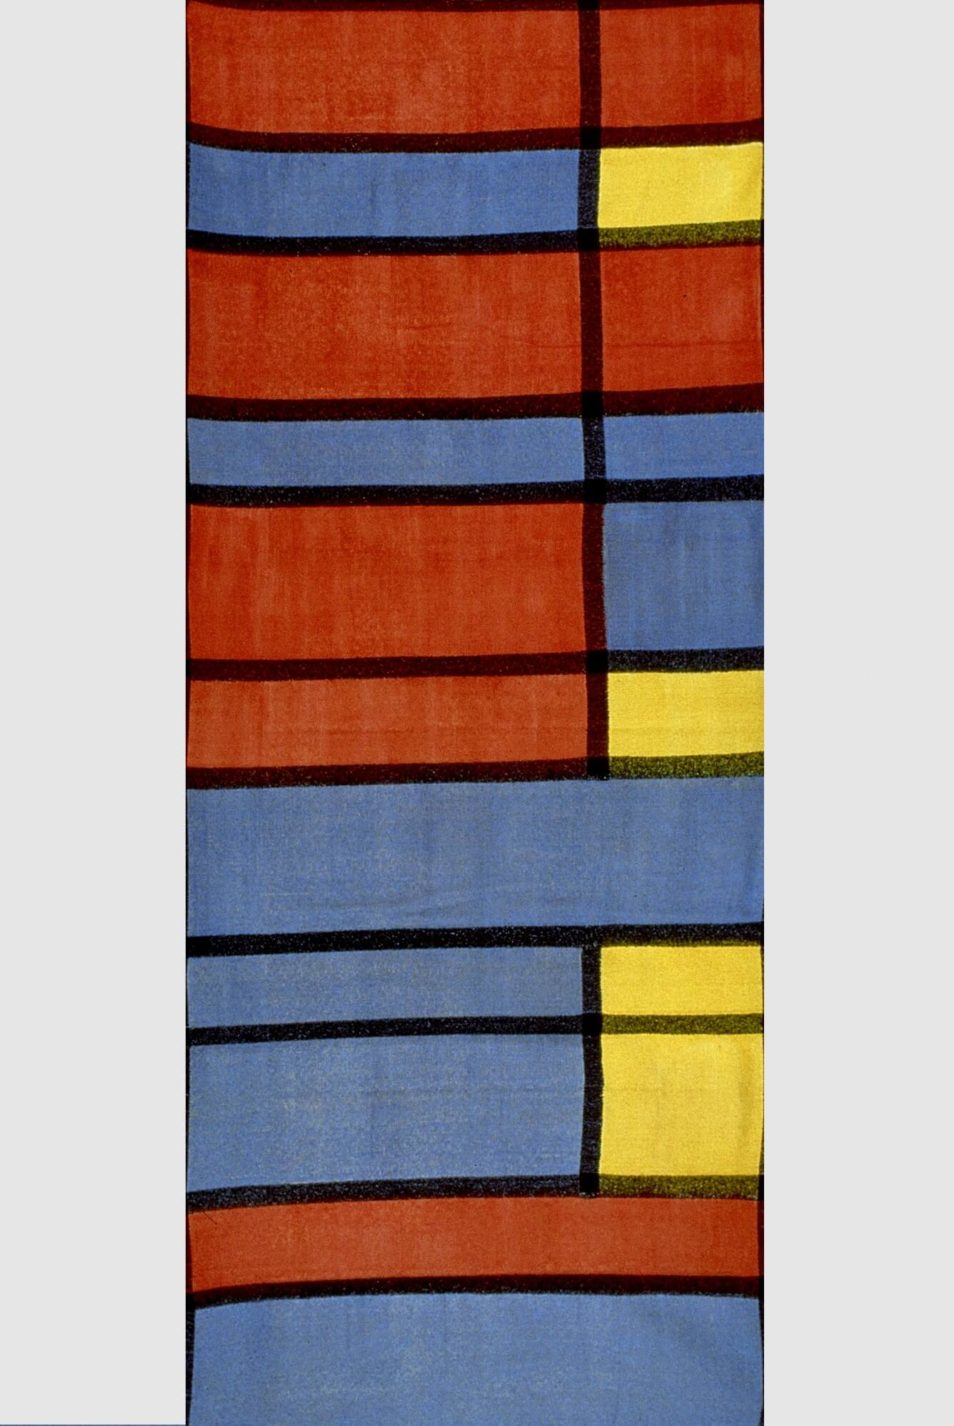 Textile with rectangles of red, blue, and yellow separated by black lines.